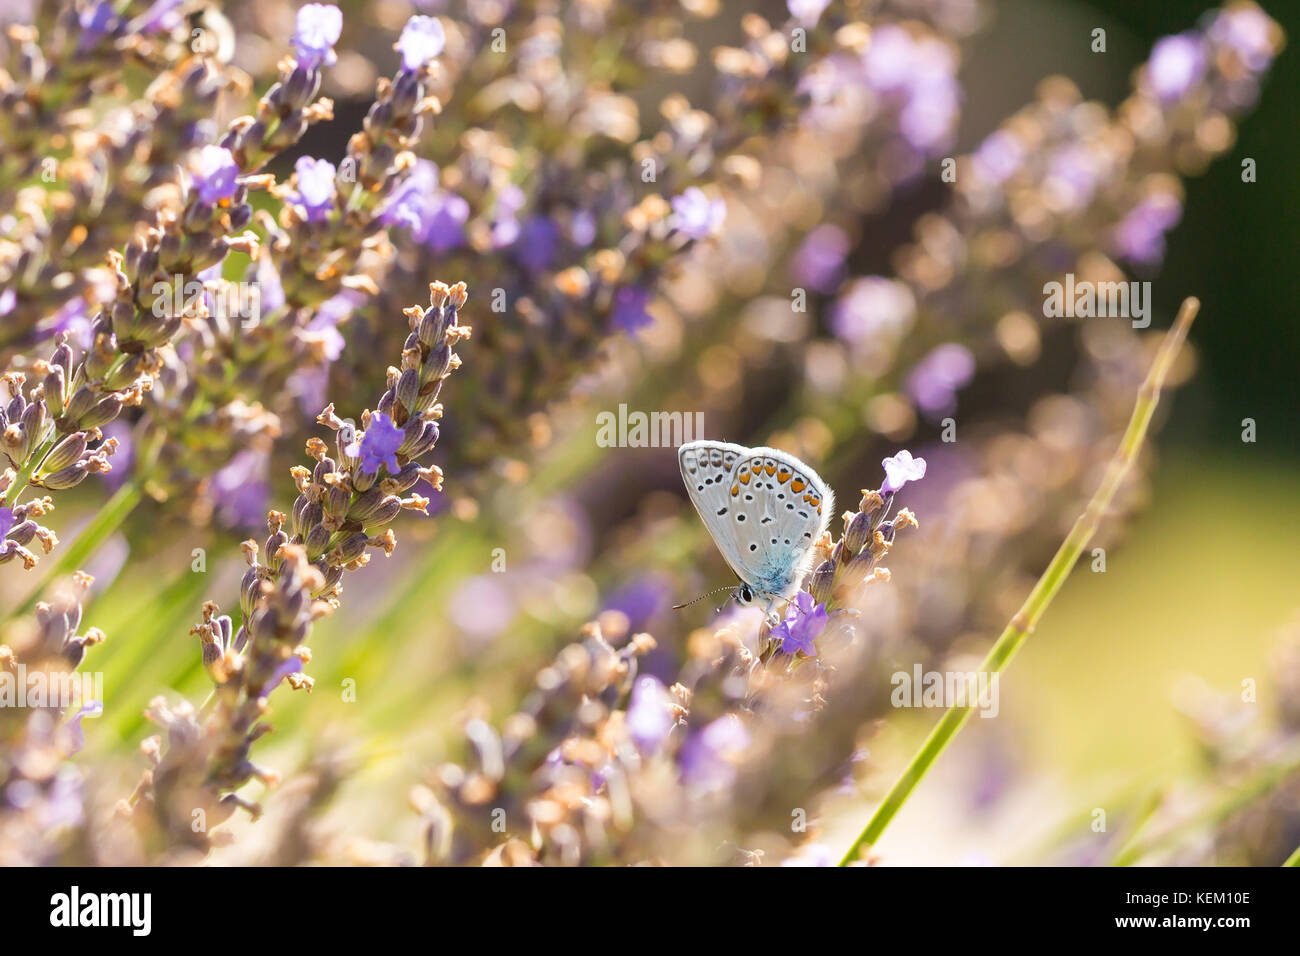 Male common blue butterfly (Polyommatus icarus) flying flower to flower while pollination and feeding nectar on purple lavender. Stock Photo